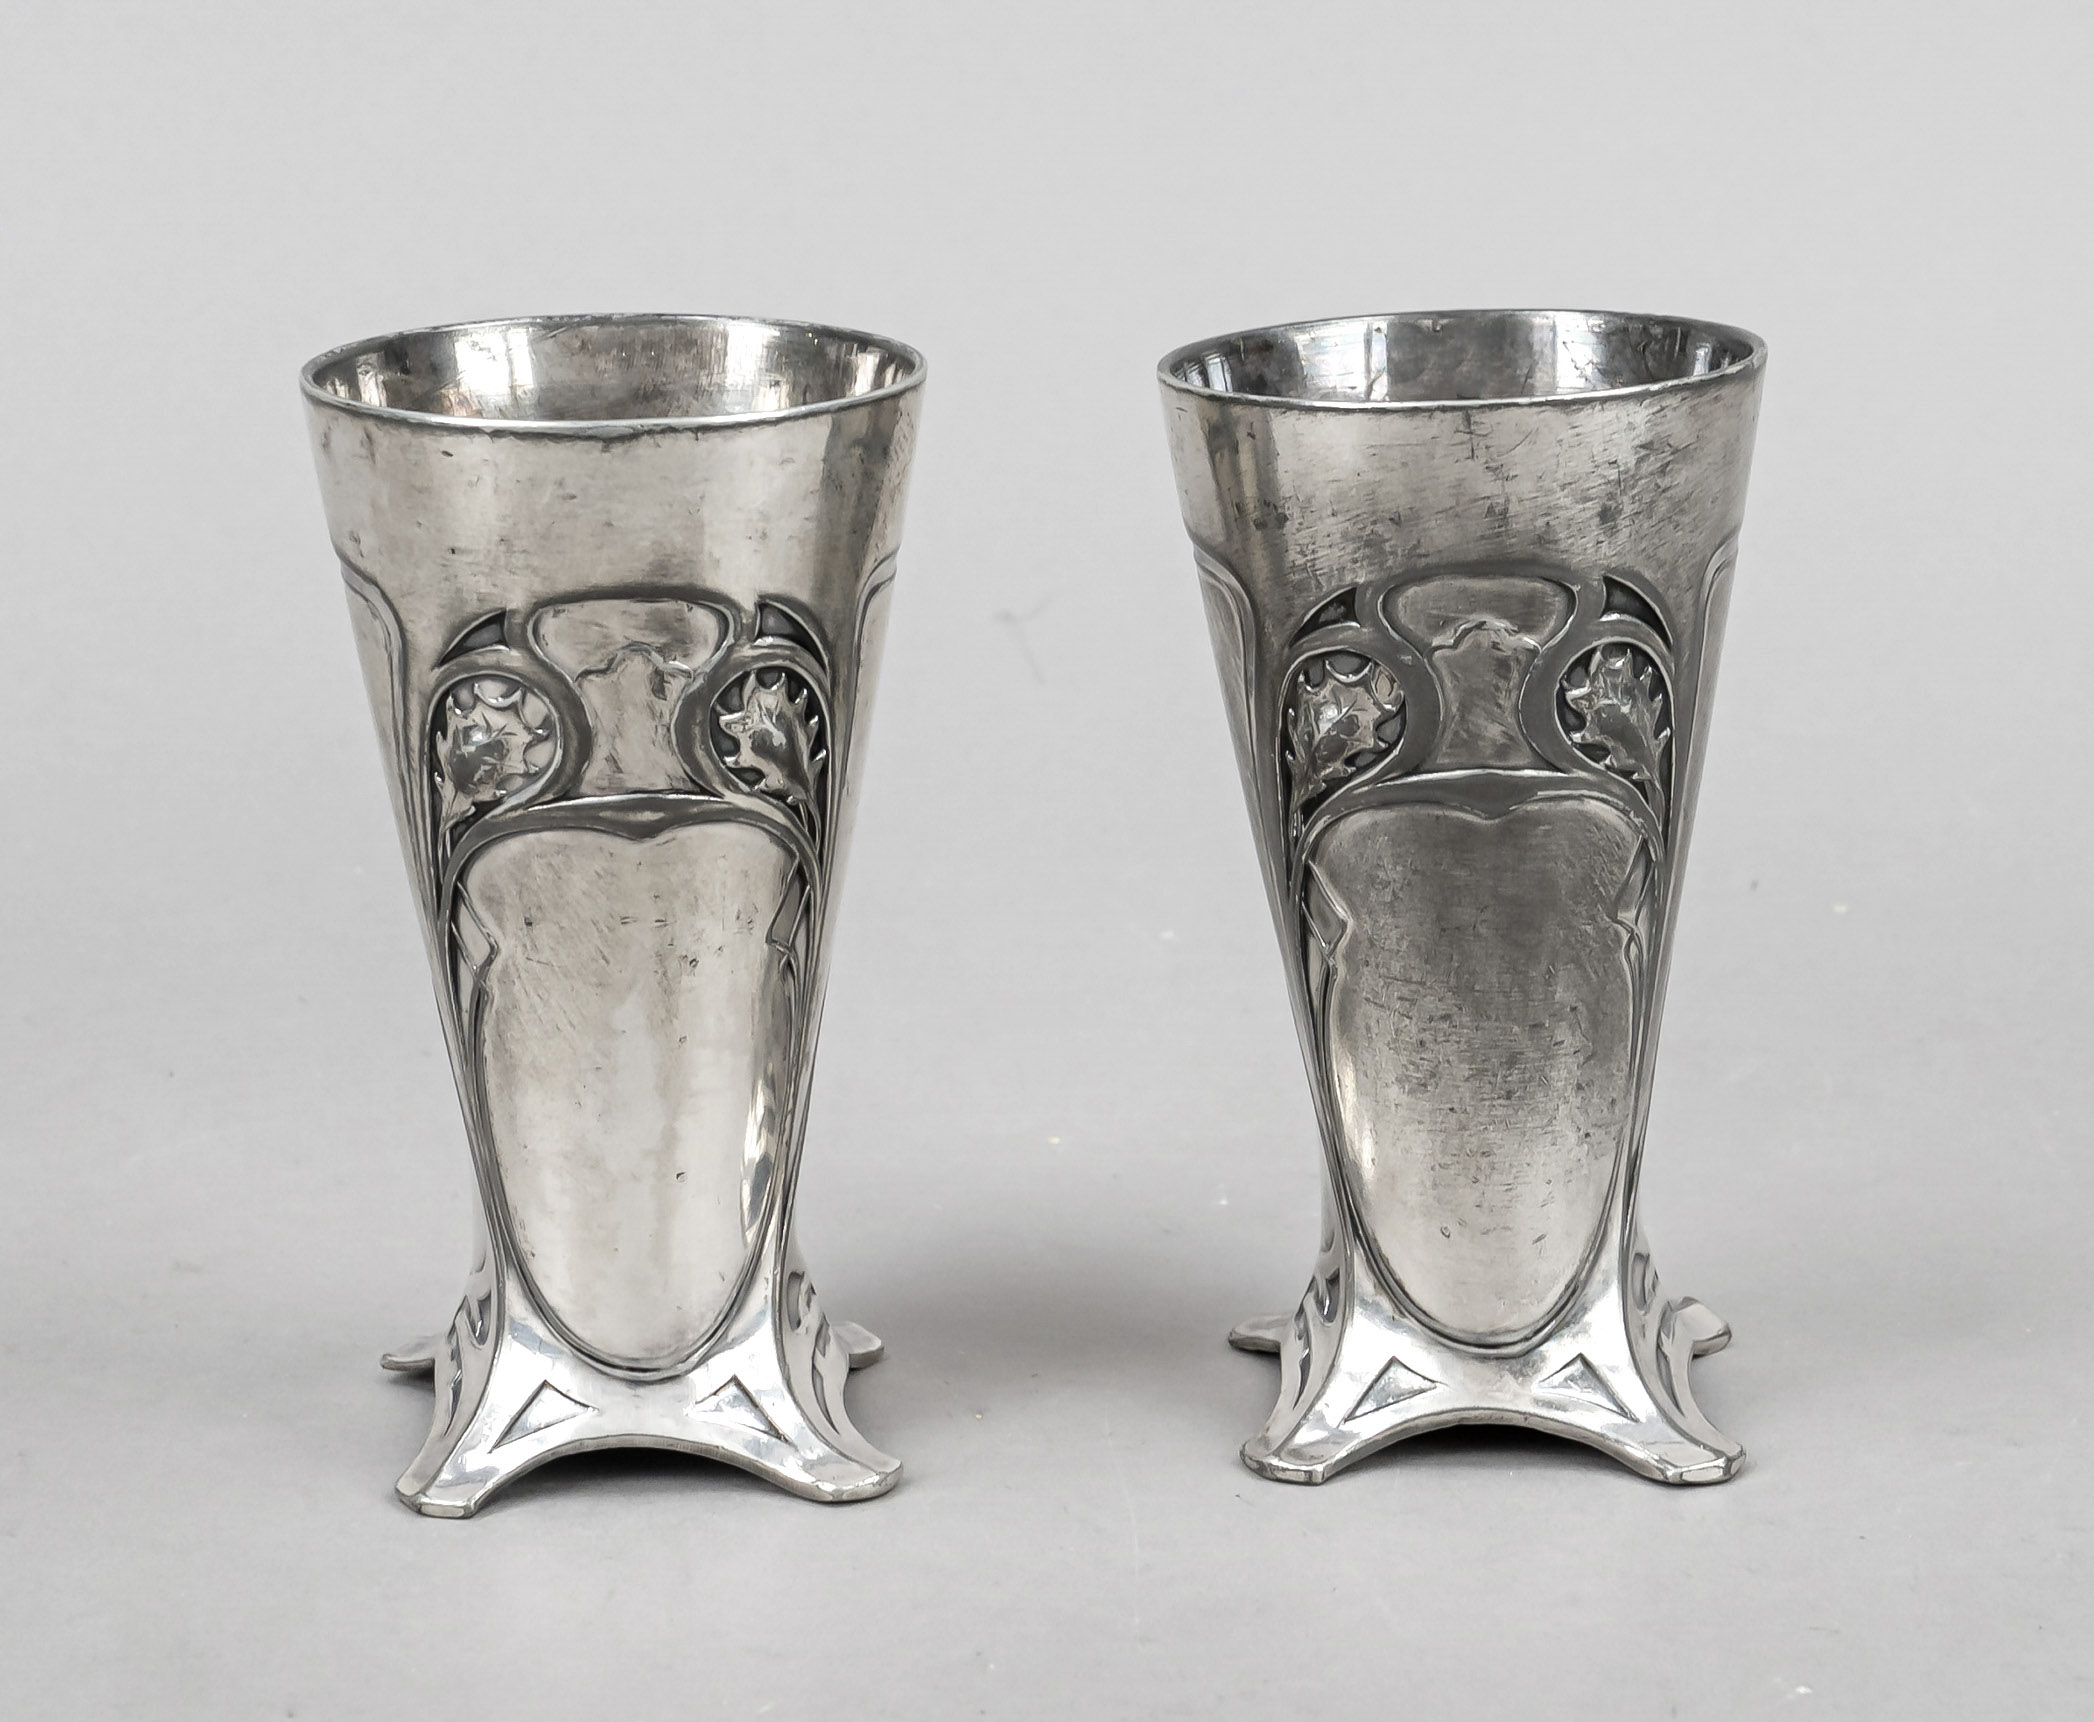 Pair of small Art Nouveau vases, c. 1900, pewter with remnants of silver plating, on 4 feet, body